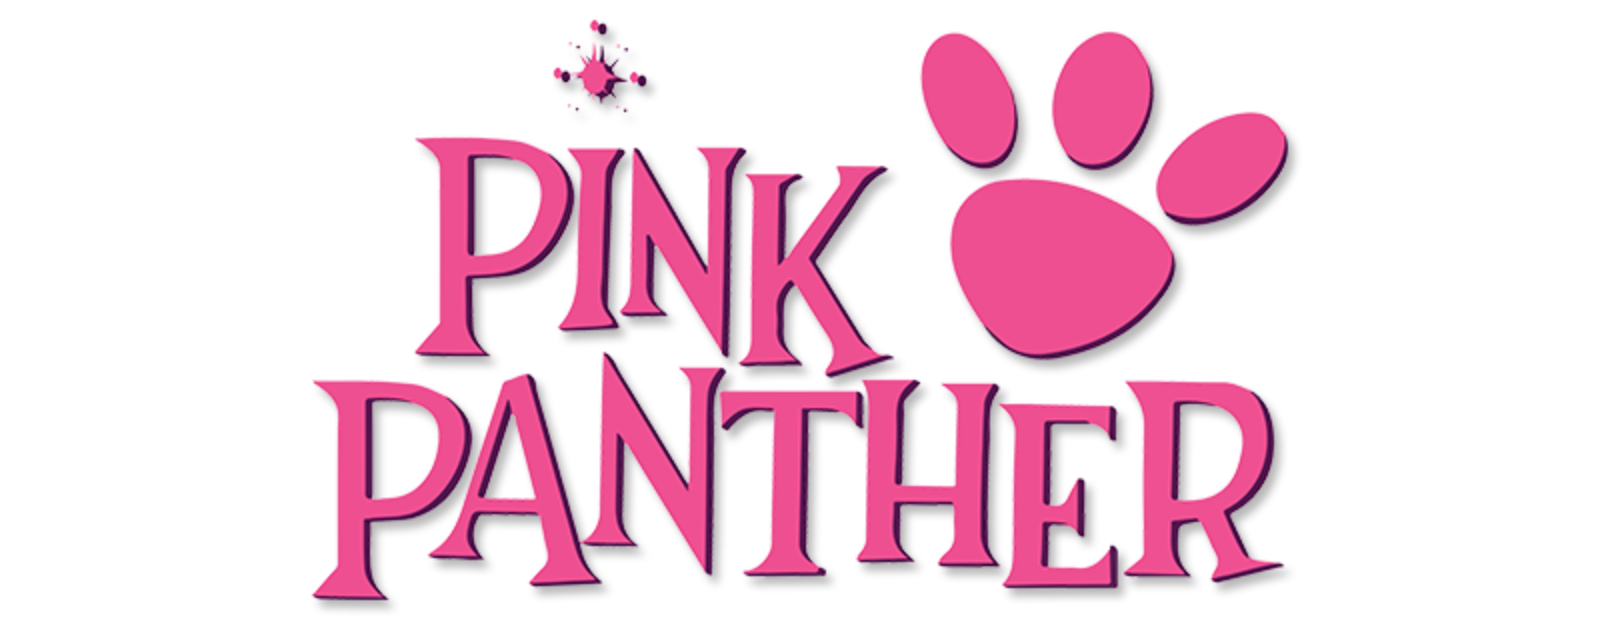 The Pink Panther Complete 